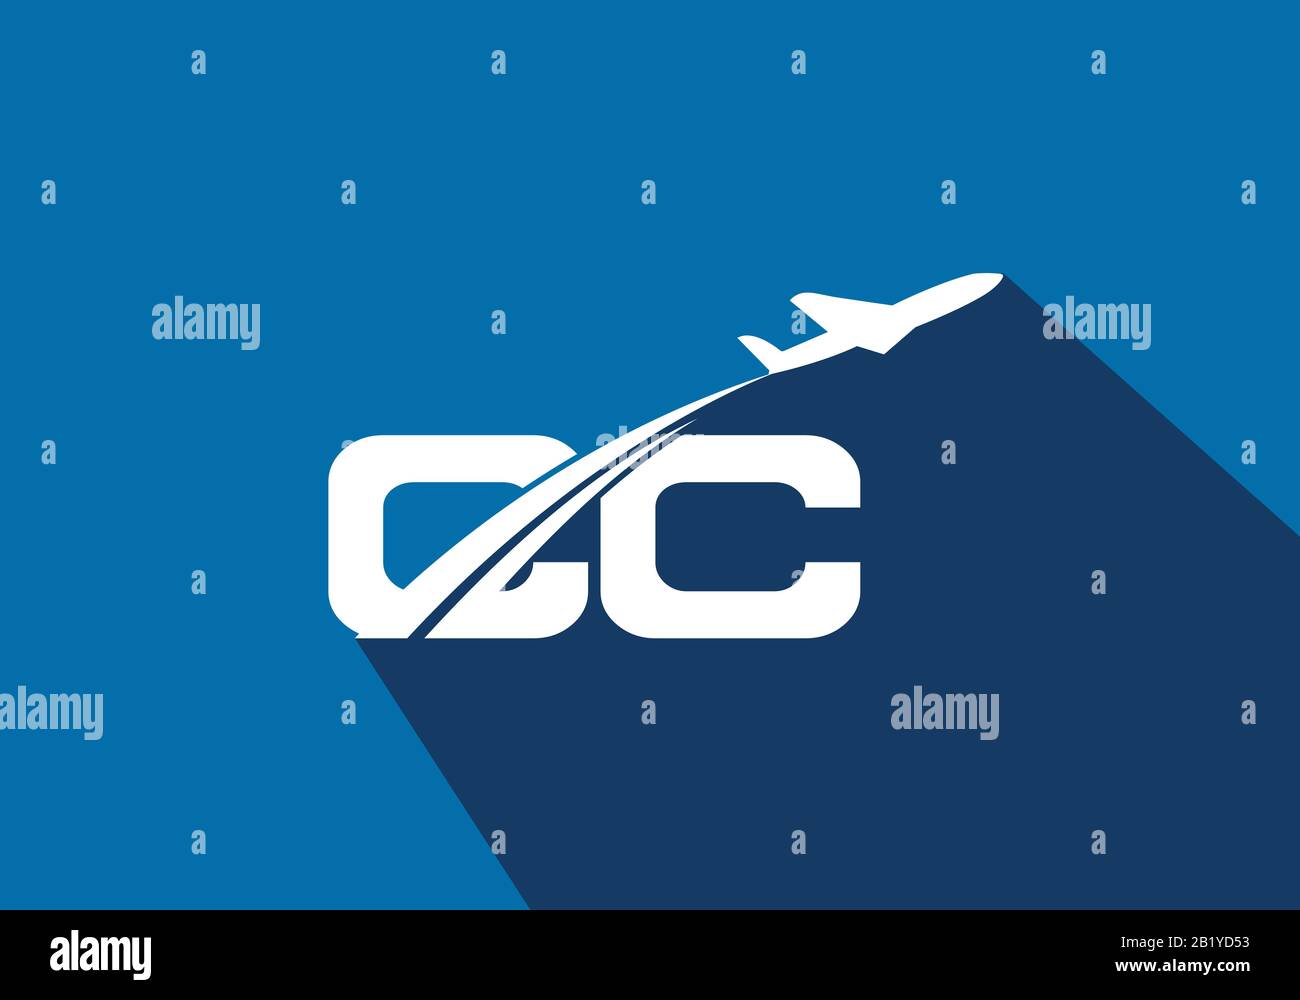 Initial Letter C and C  with Aviation Logo Design, Air, Airline, Airplane and Travel Logo template. Stock Vector